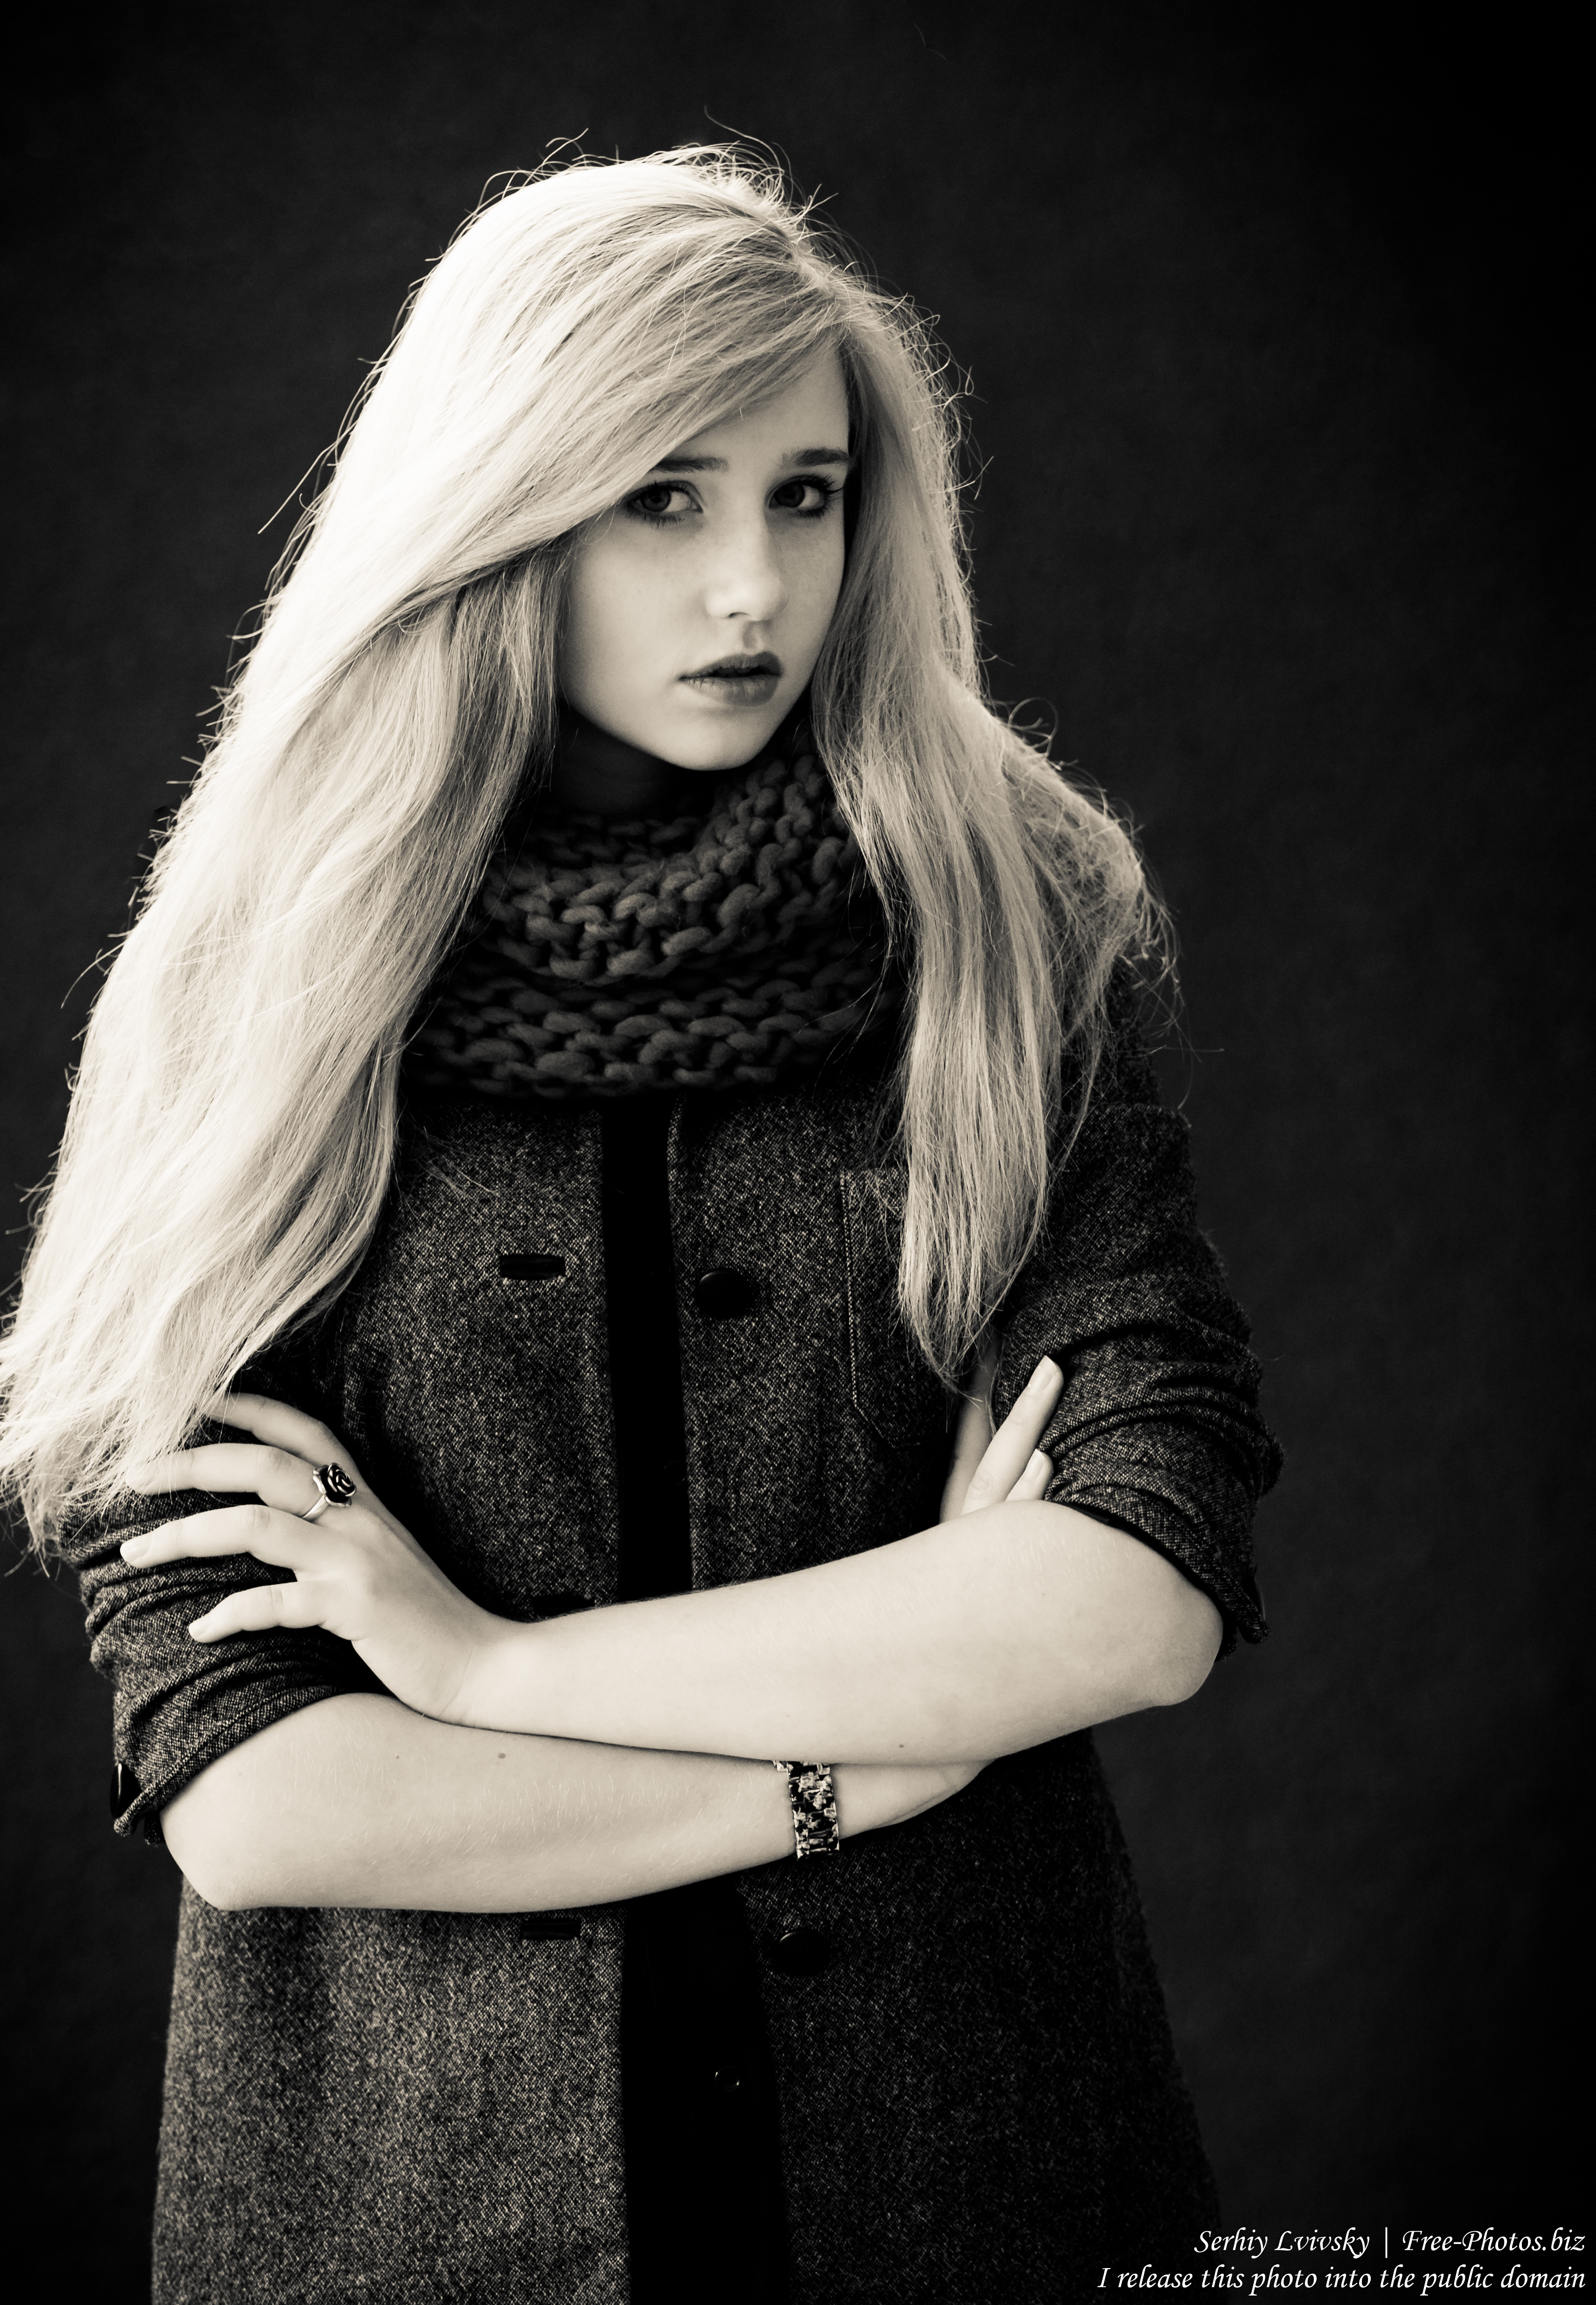 a seventeen-year-old natural blond girl with blue eyes photographed by Serhiy Lvivsky in October 2015, picture 2